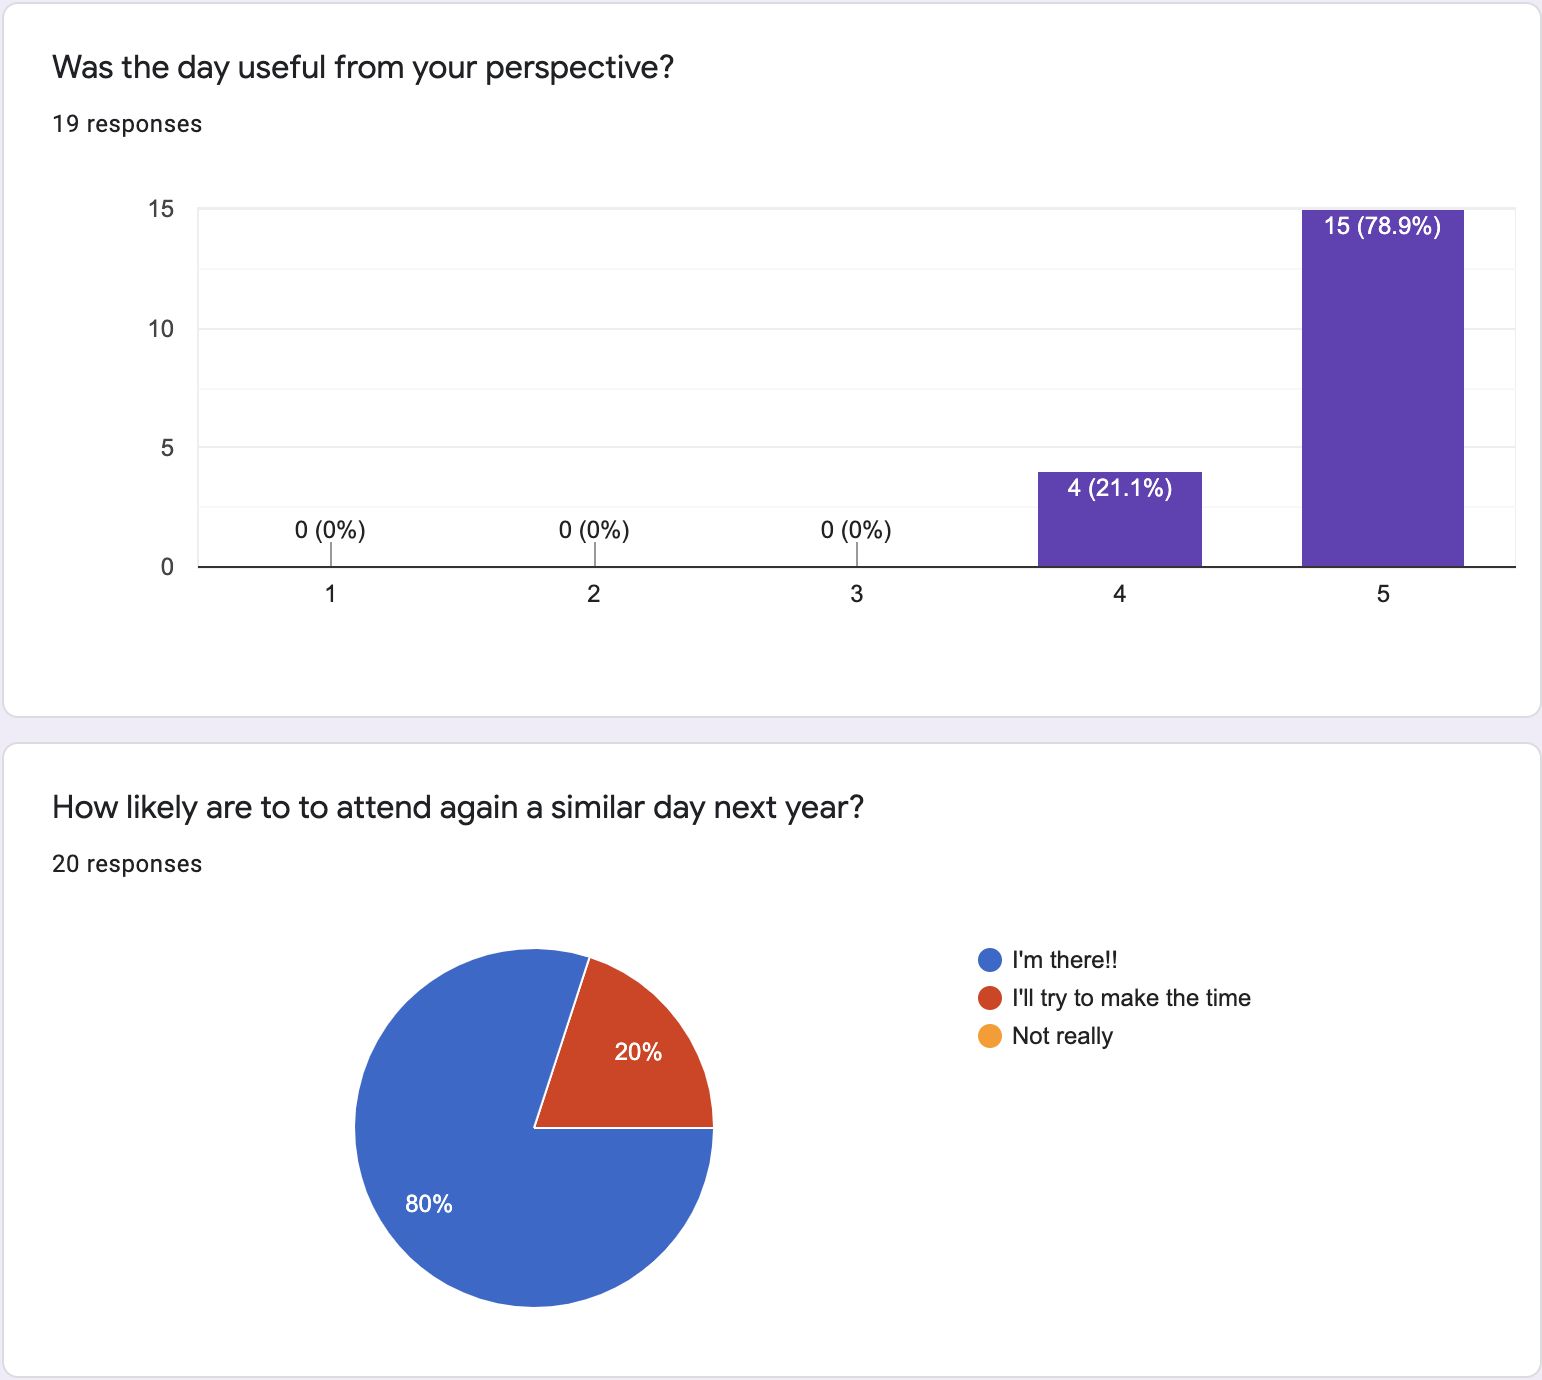 Survey results regarding satisfaction from the F2F: "was the day useful from your perspective?" 19 responses, 15 answered 5/5 and 4 answered 4/5. "How likely are you to attend again?" 20 responses, 80% answered "I am there!!", 20% answered "I will try to make it"